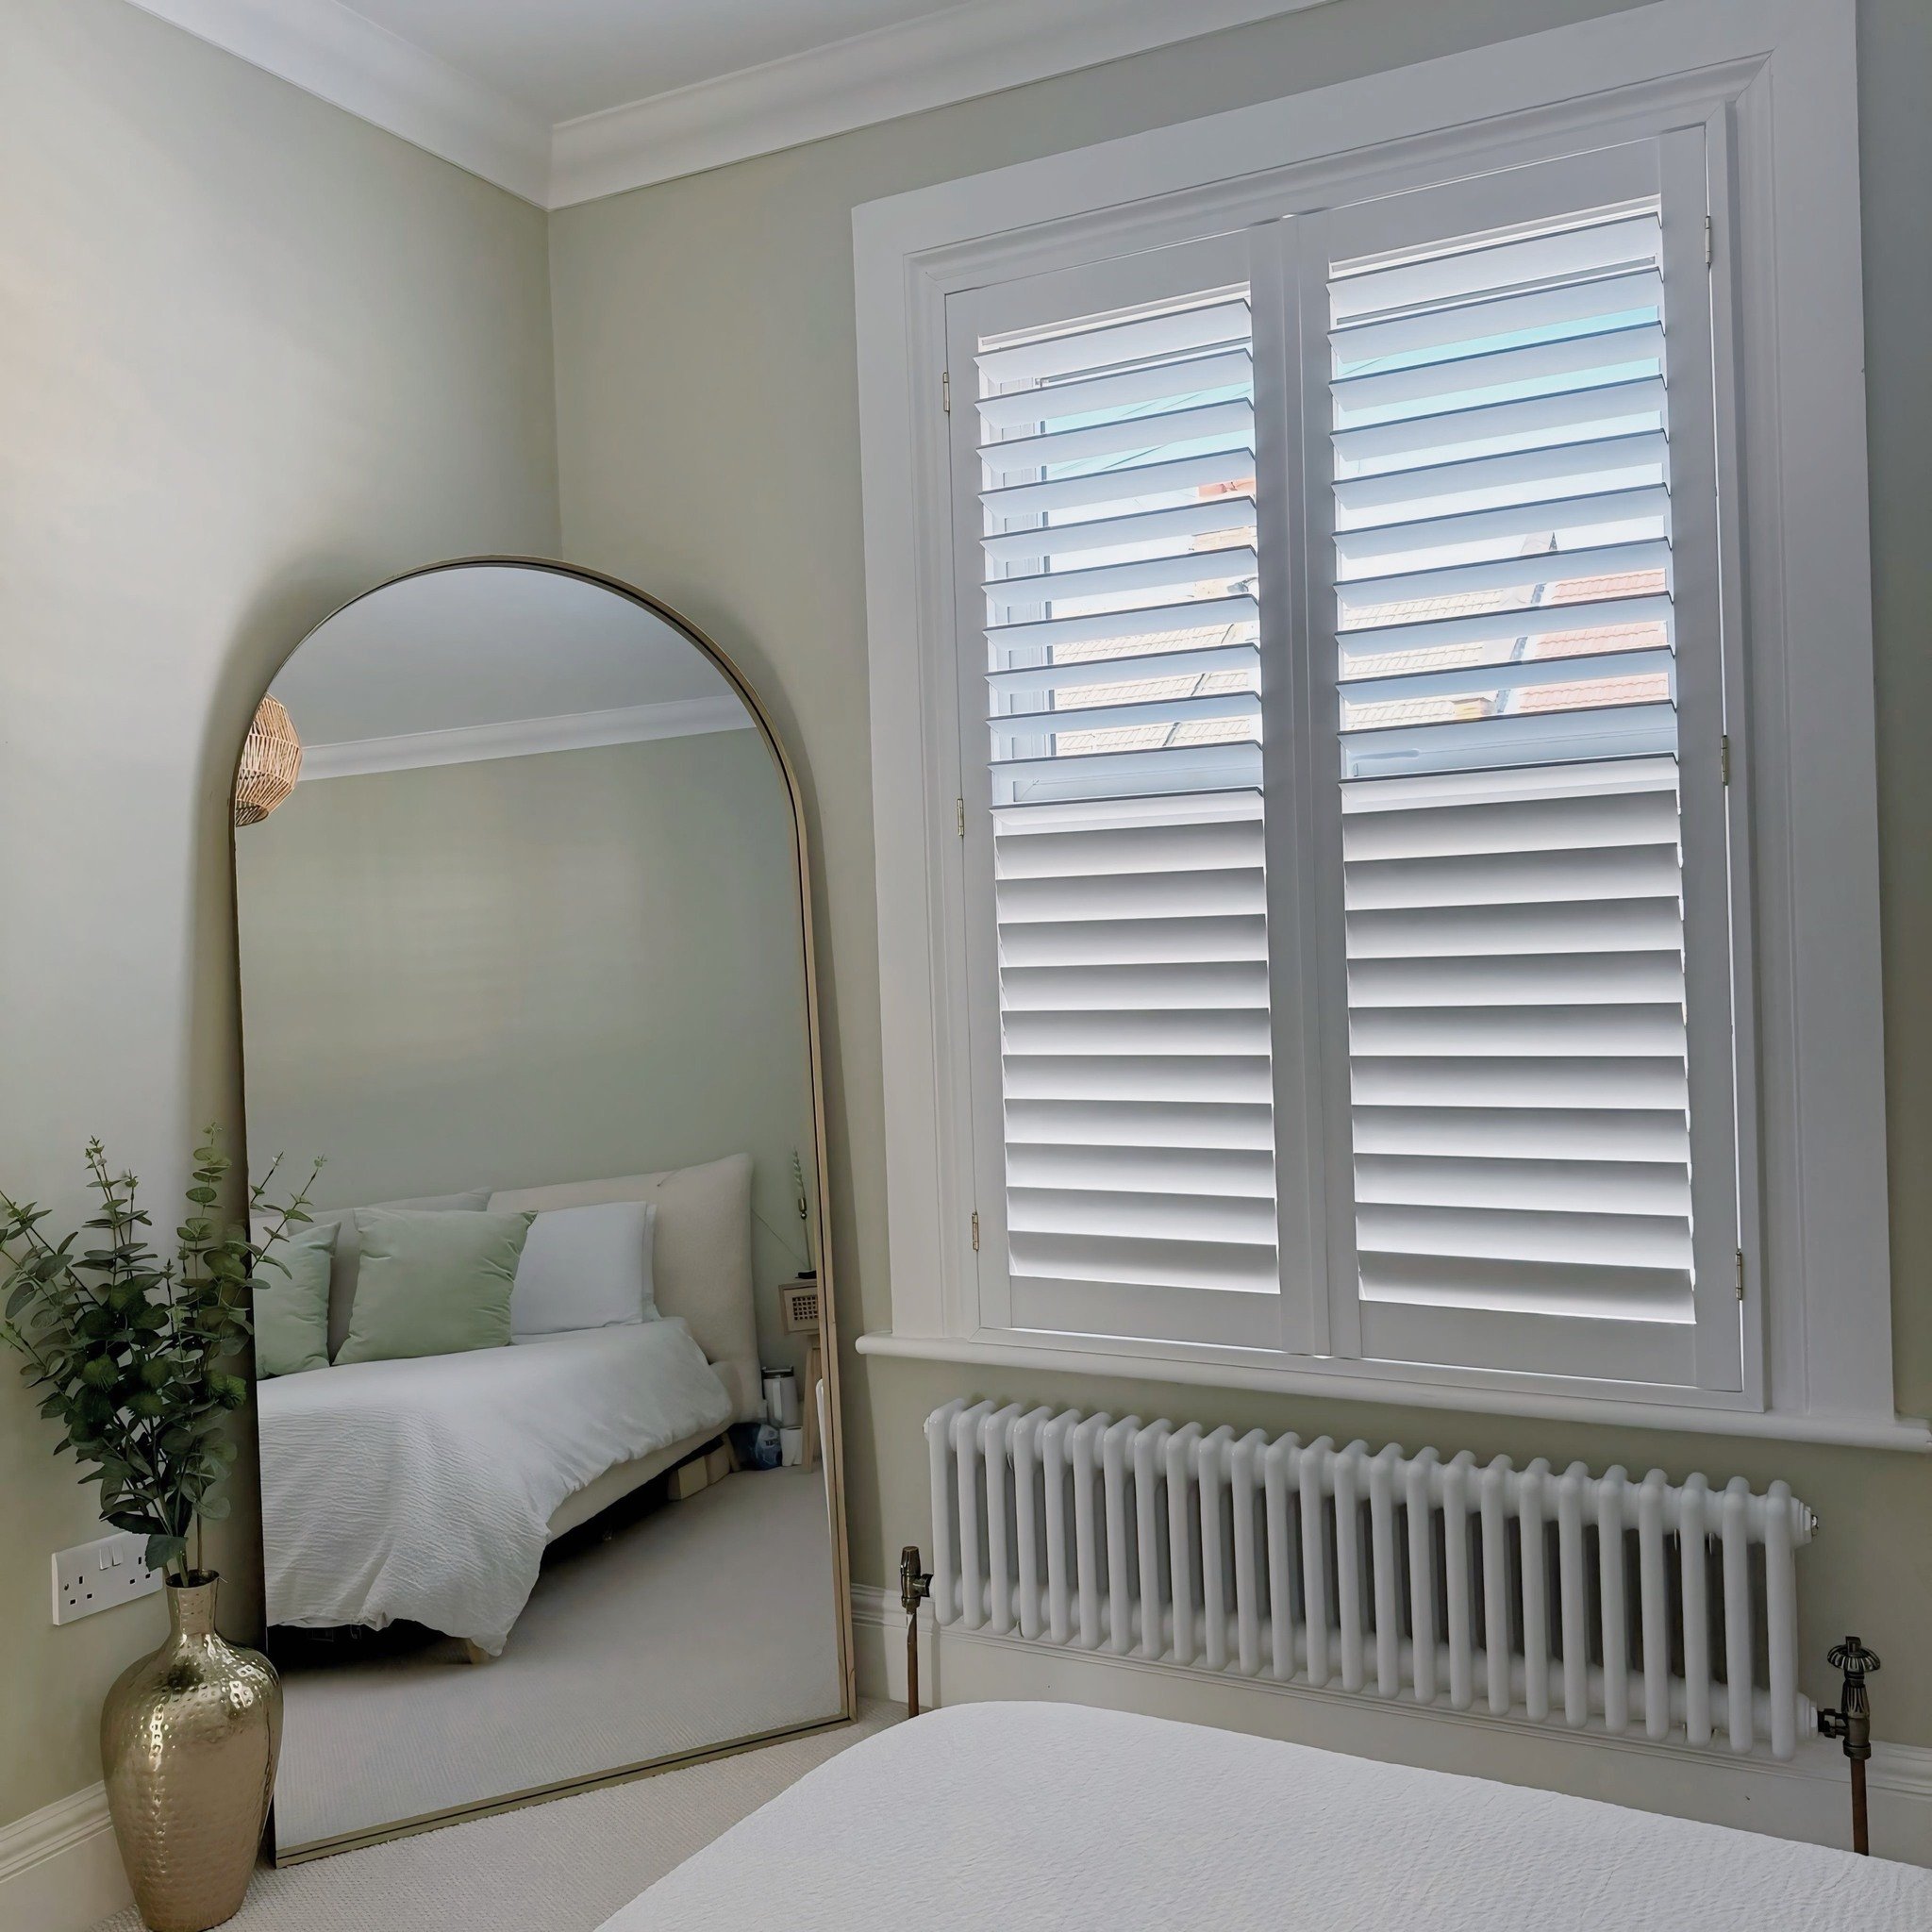 Embrace Timeless Elegance With Our Full Height Shutters! 

Installed in Pure White Colourway, with 76mm Medium Slats and Matching White Hinges, These Shutters Bring a Touch of Sophistication to This Customer's Sash Window.

Elevate Your Bedroom's Aes